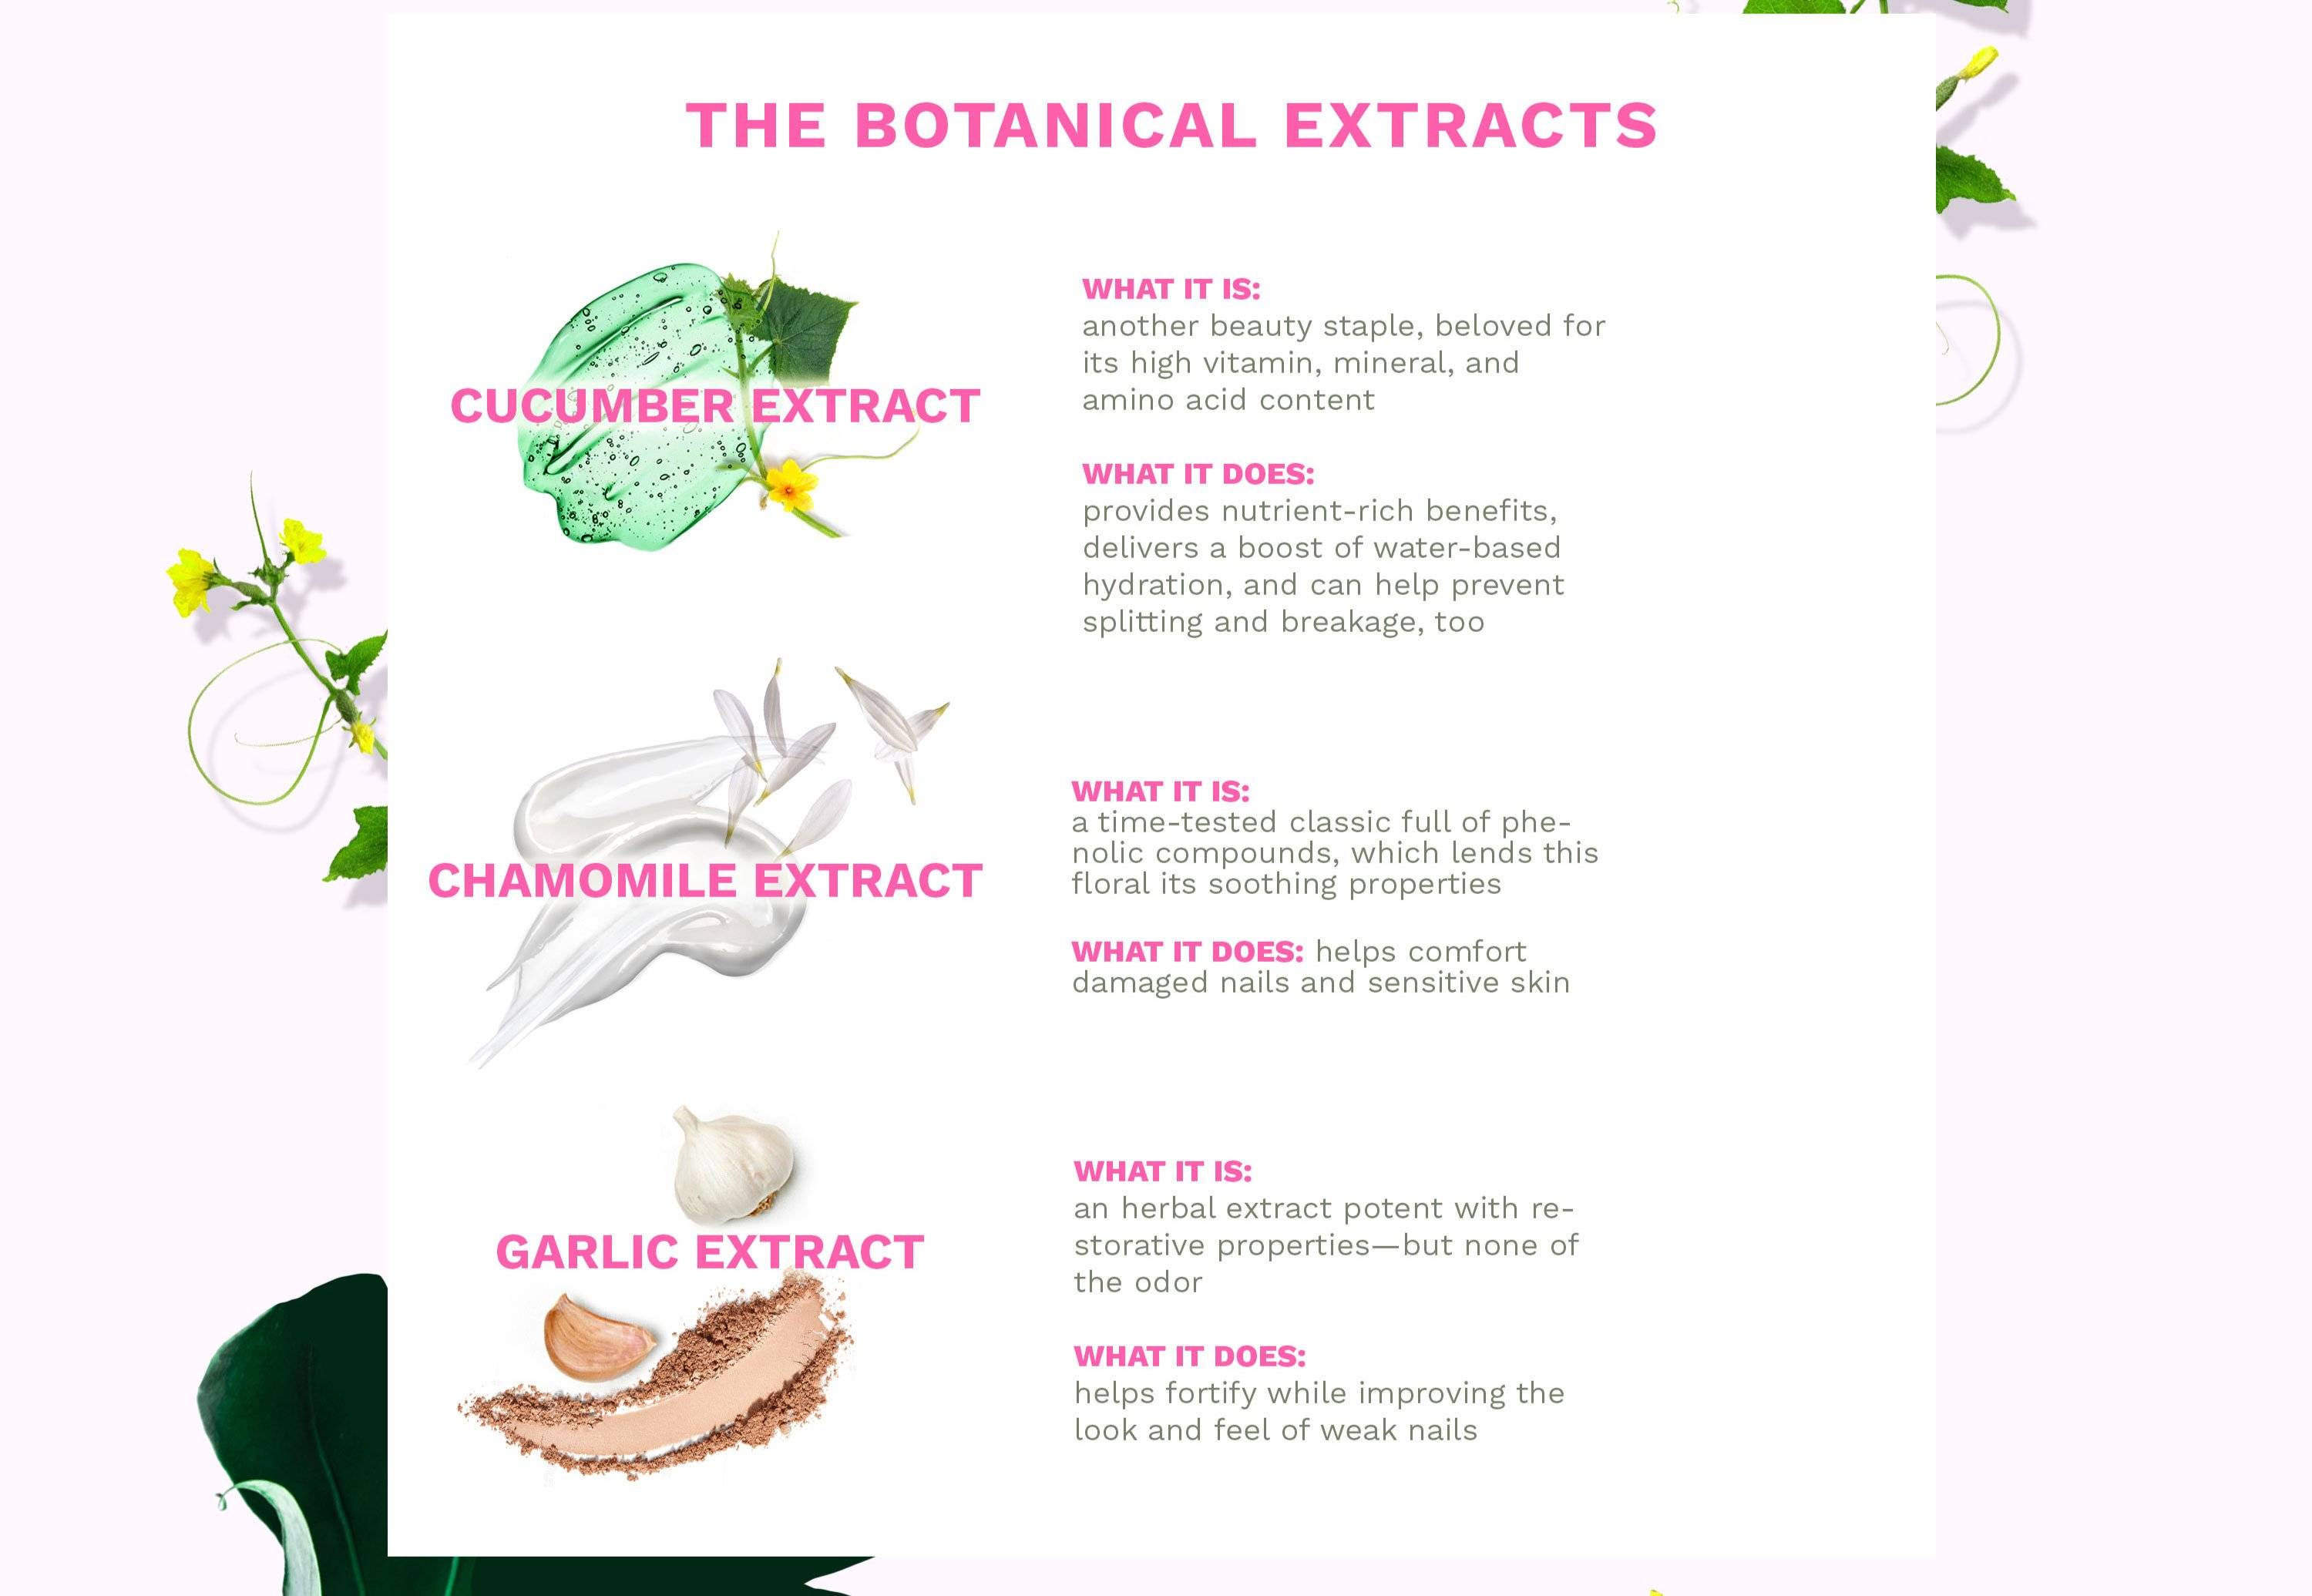 The Botanical Extracts